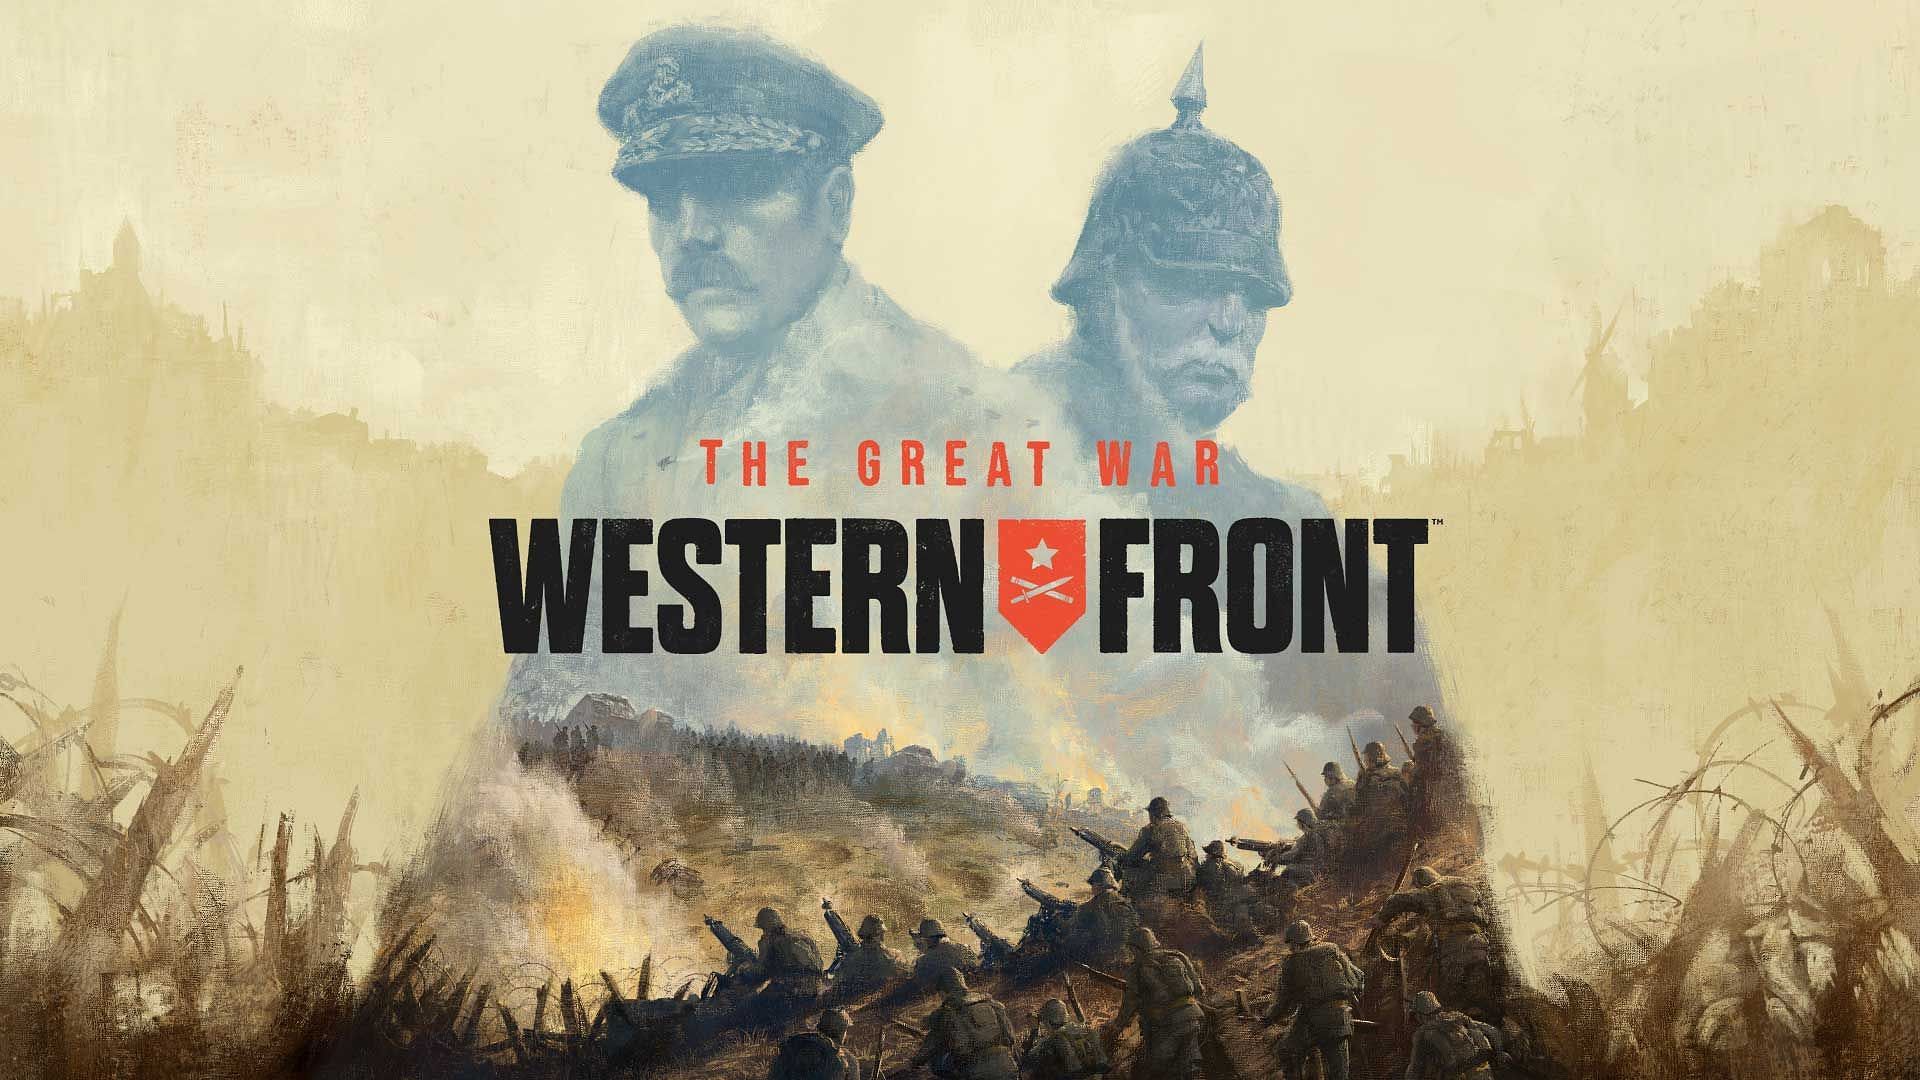 The image depicts a cover art for The Great War: Western Front with images of commanding officers, soldires and trenches